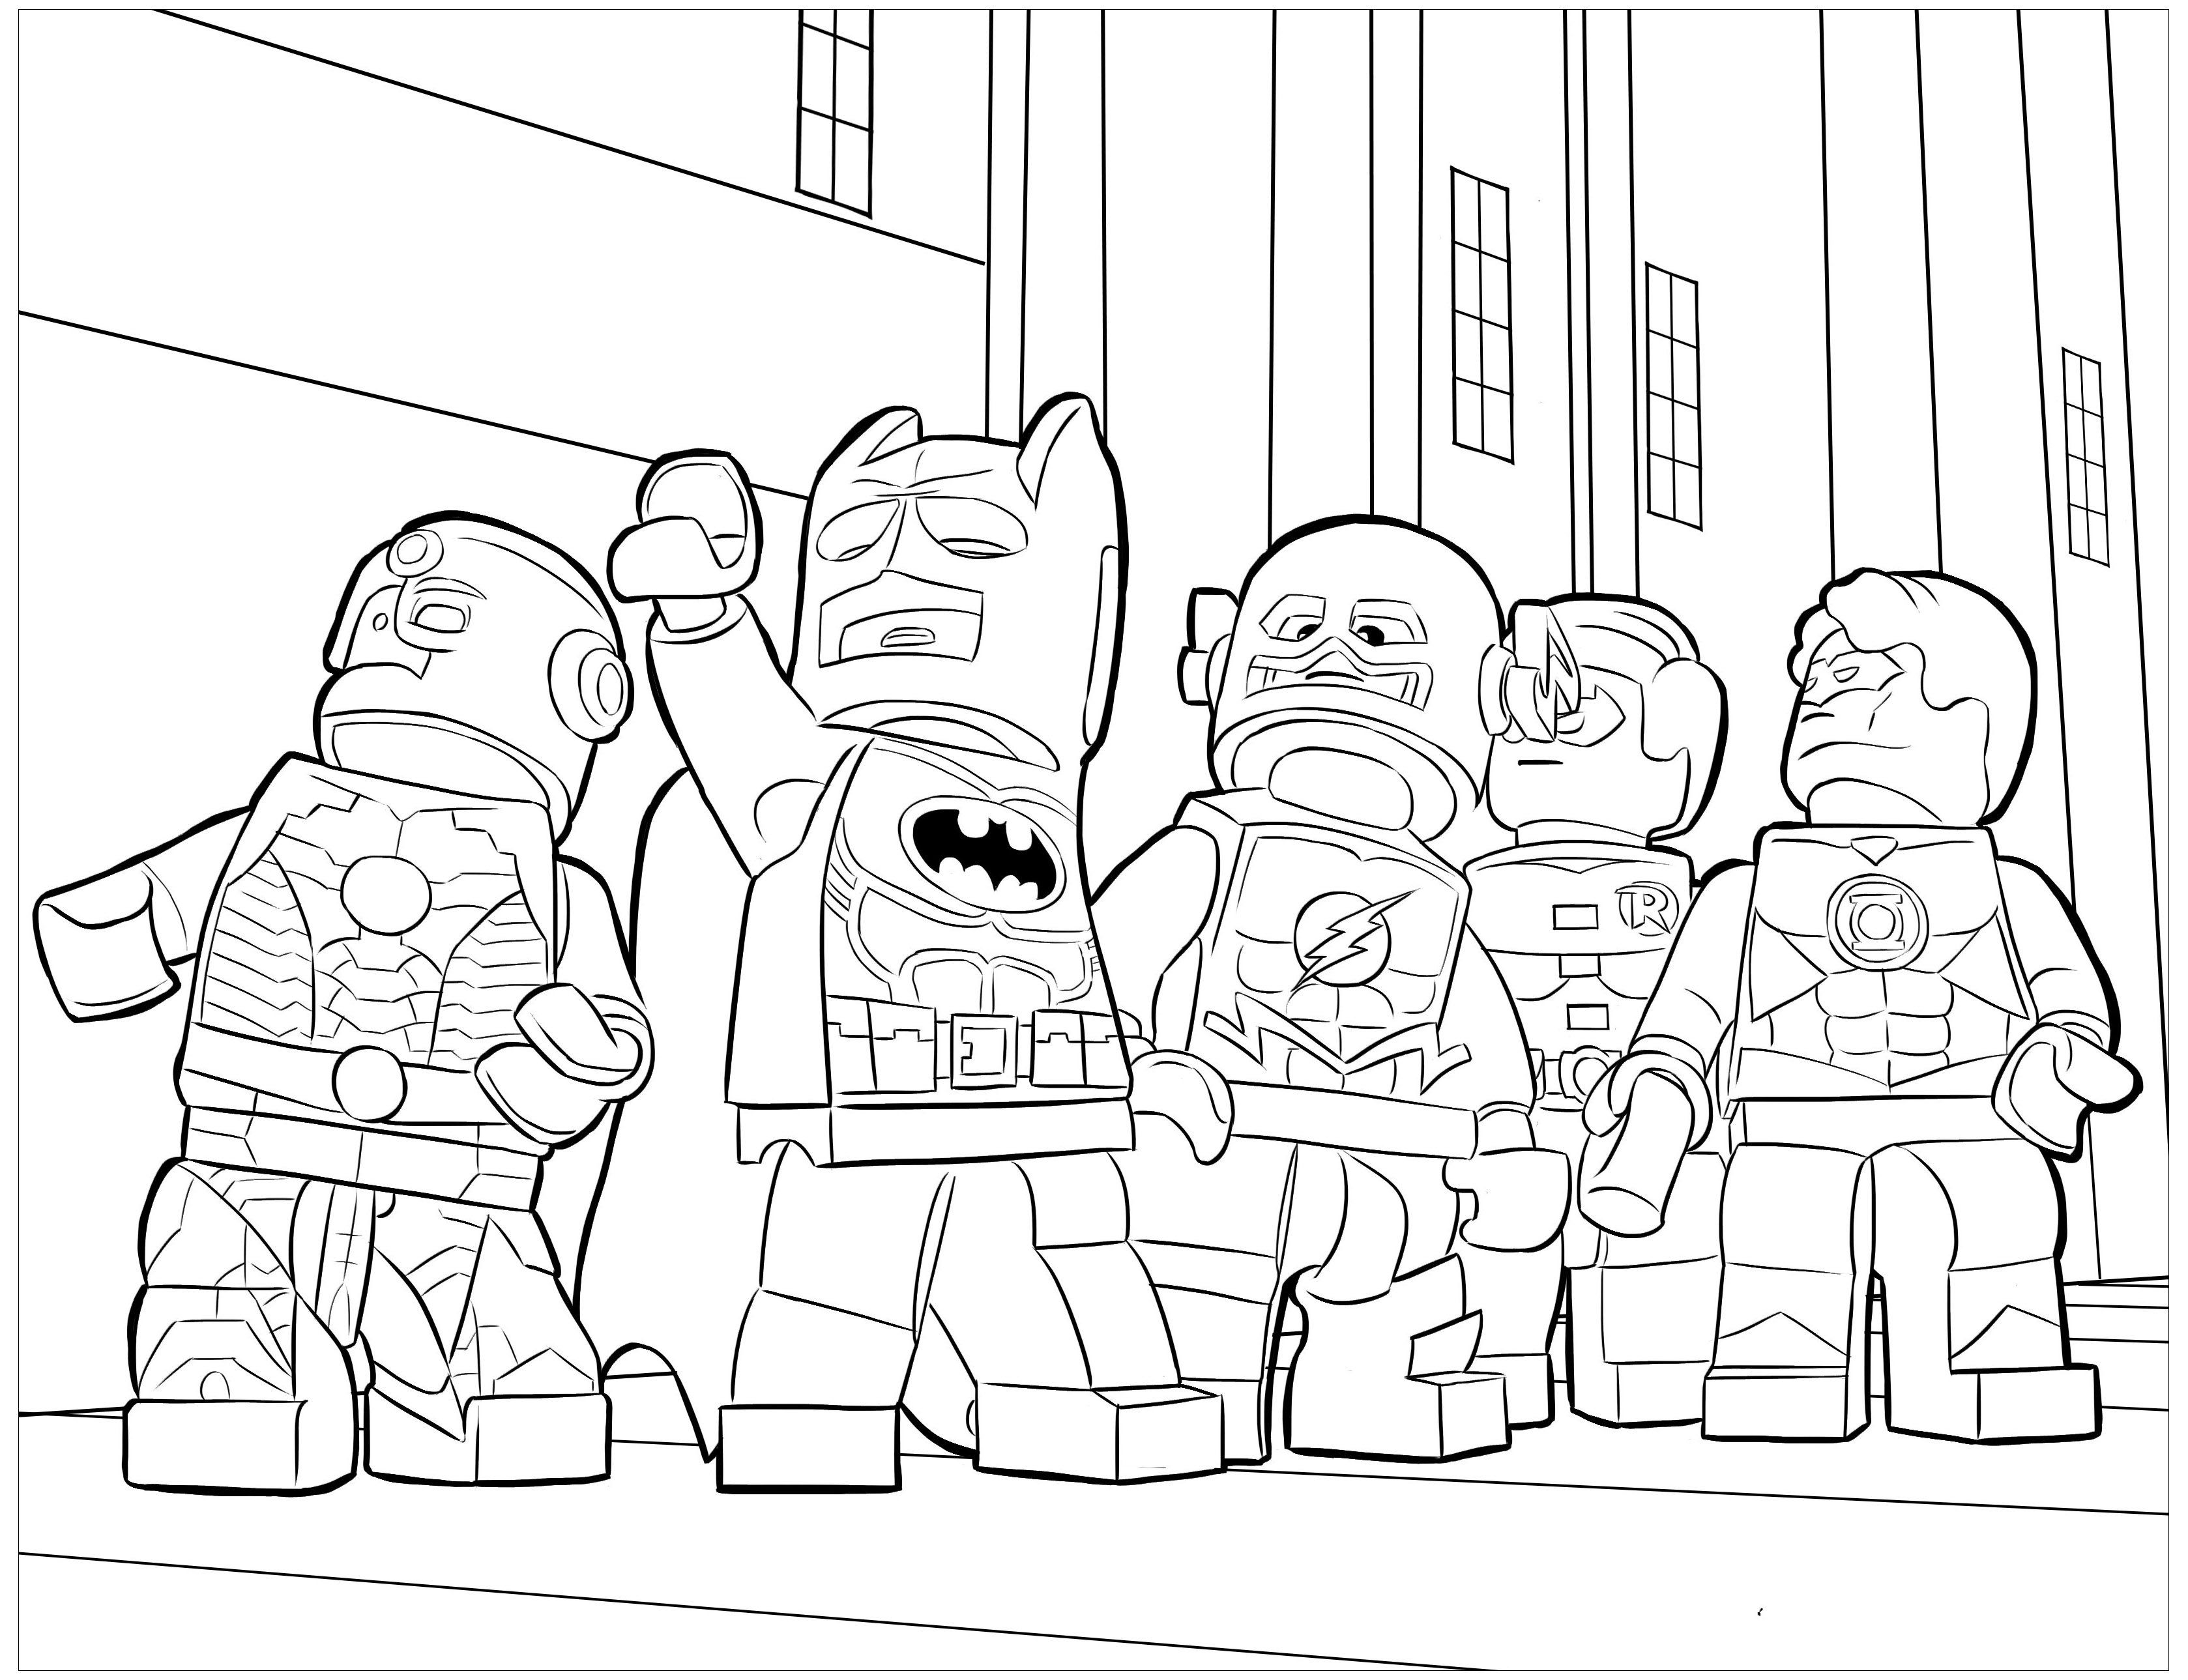 Lego Batman 2 Coloring Pages Batman Lego Coloring Pages Cmseal - Drawing Coloring Page